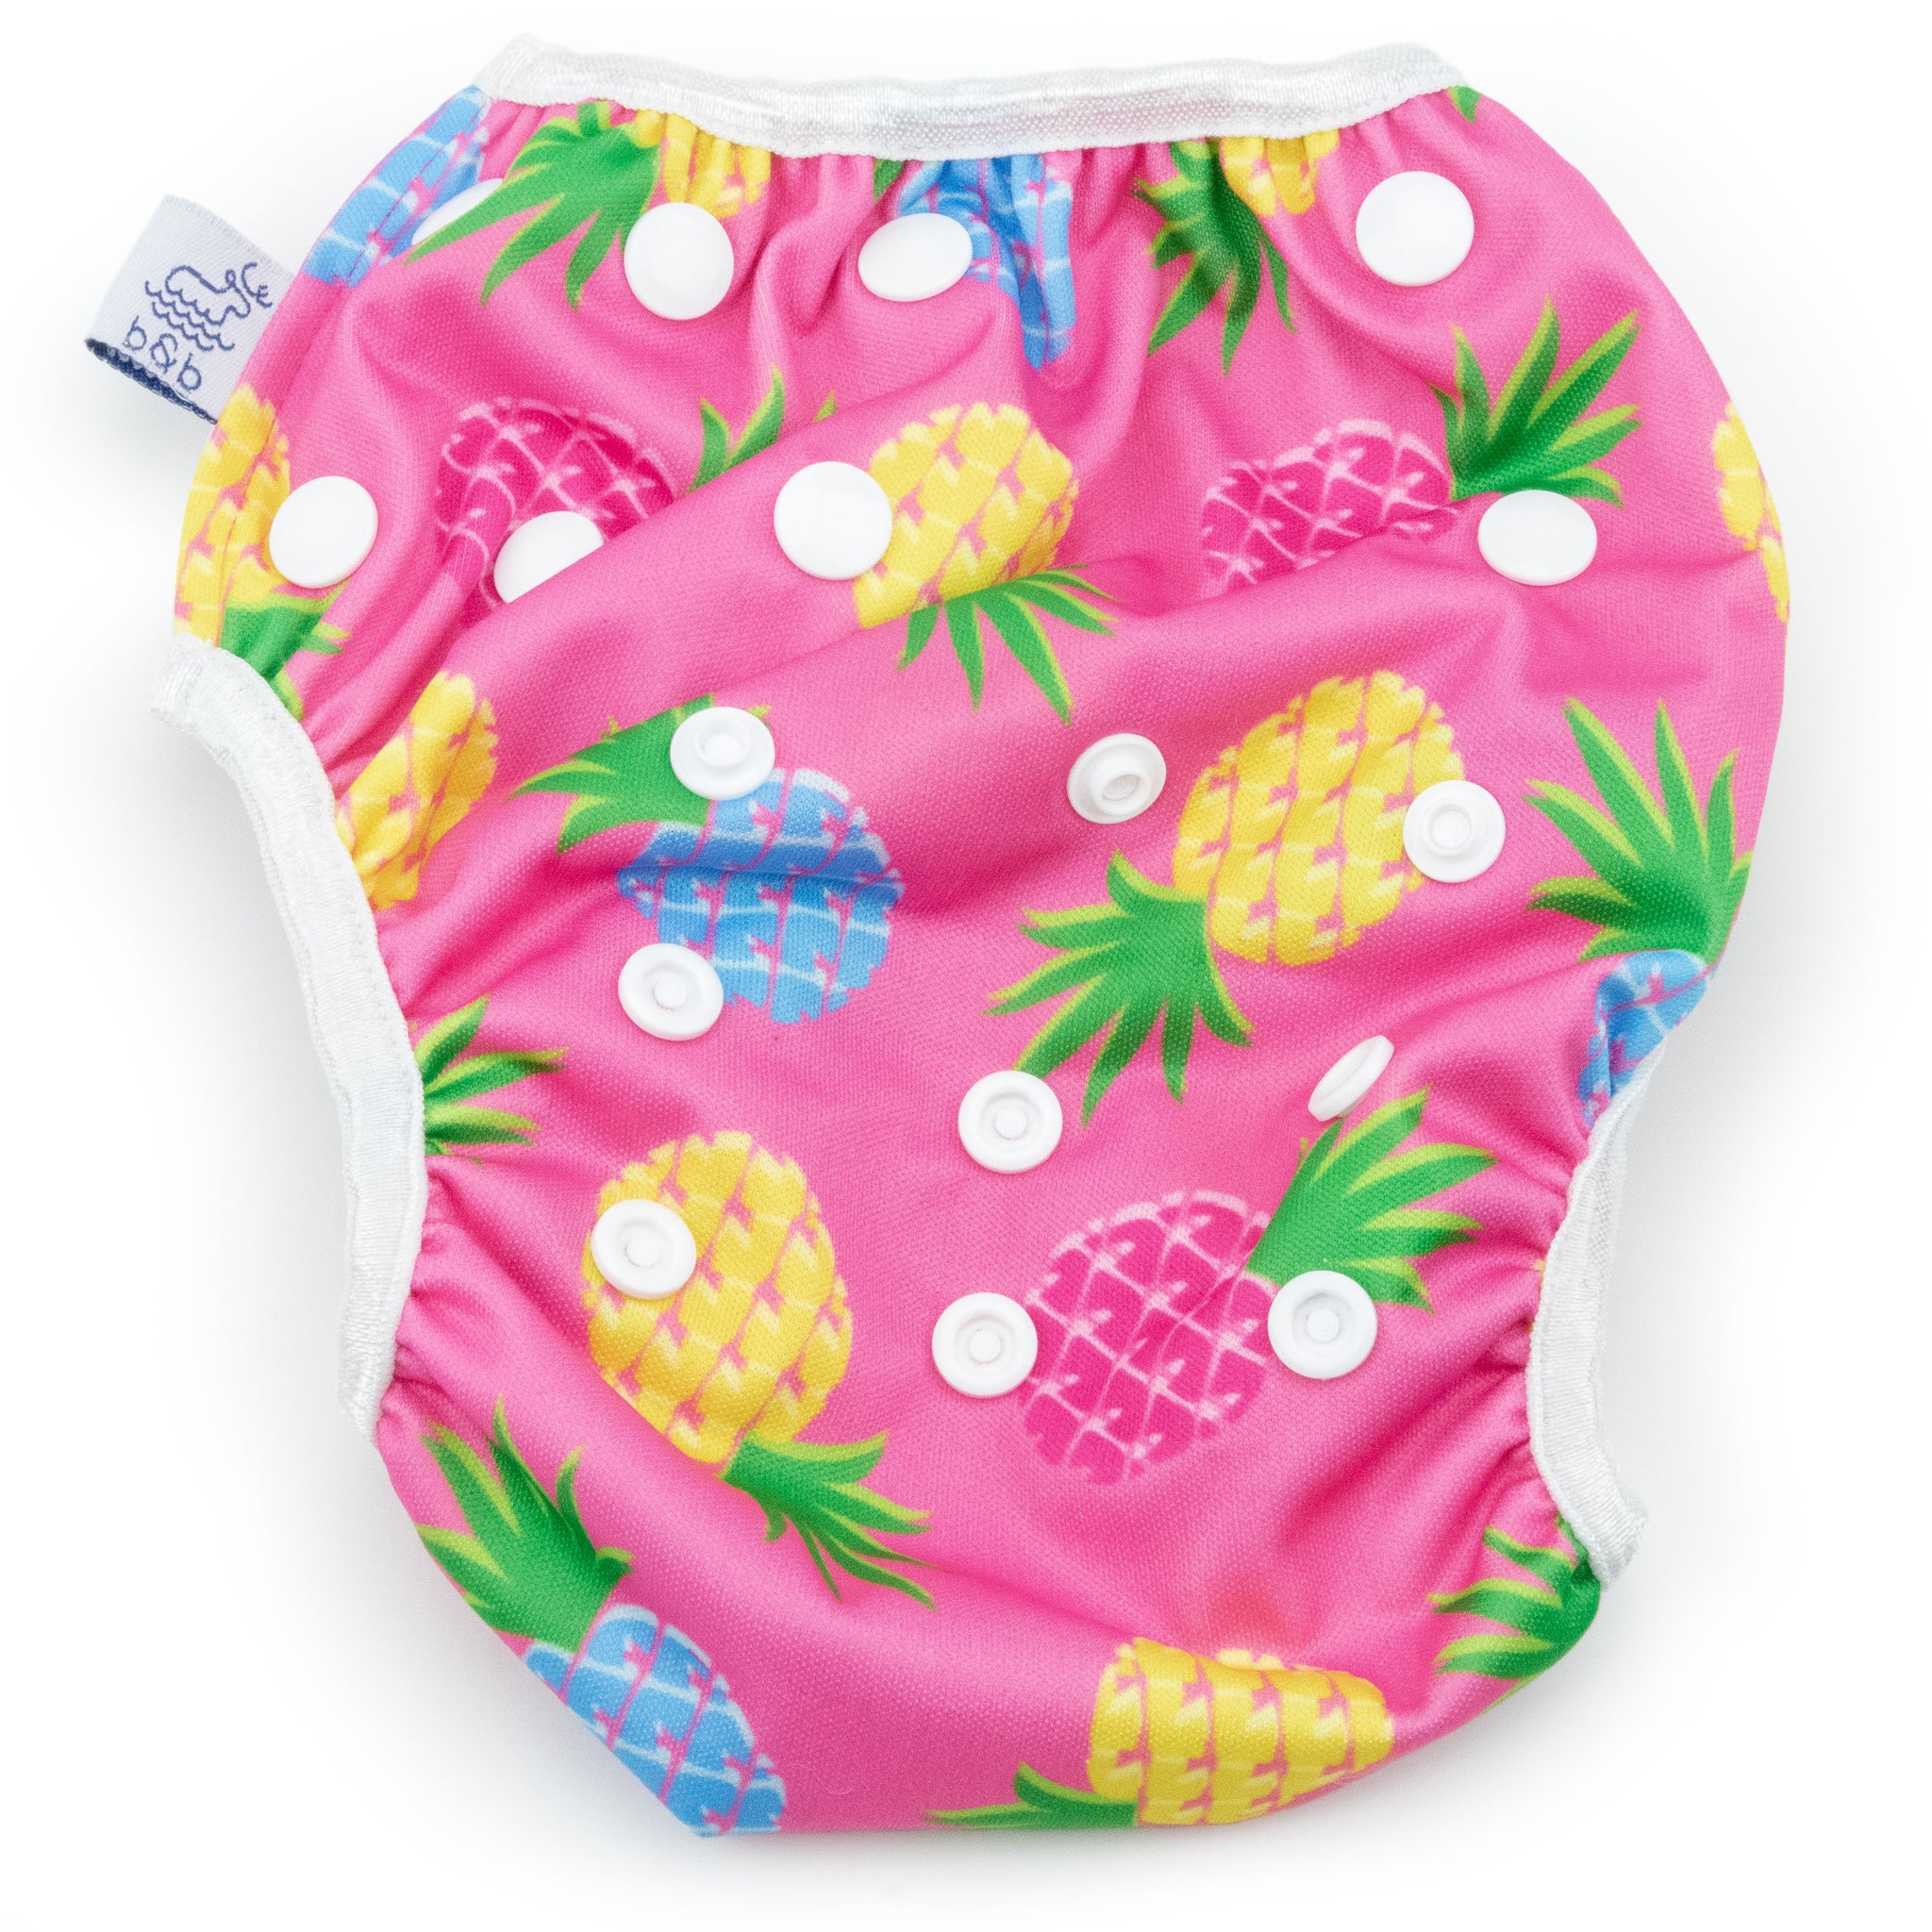 Beau and Belle Littles Swim Diaper, Large Size, light pink background with yellow, dark pink, and blue pineapples, flat lay, front view